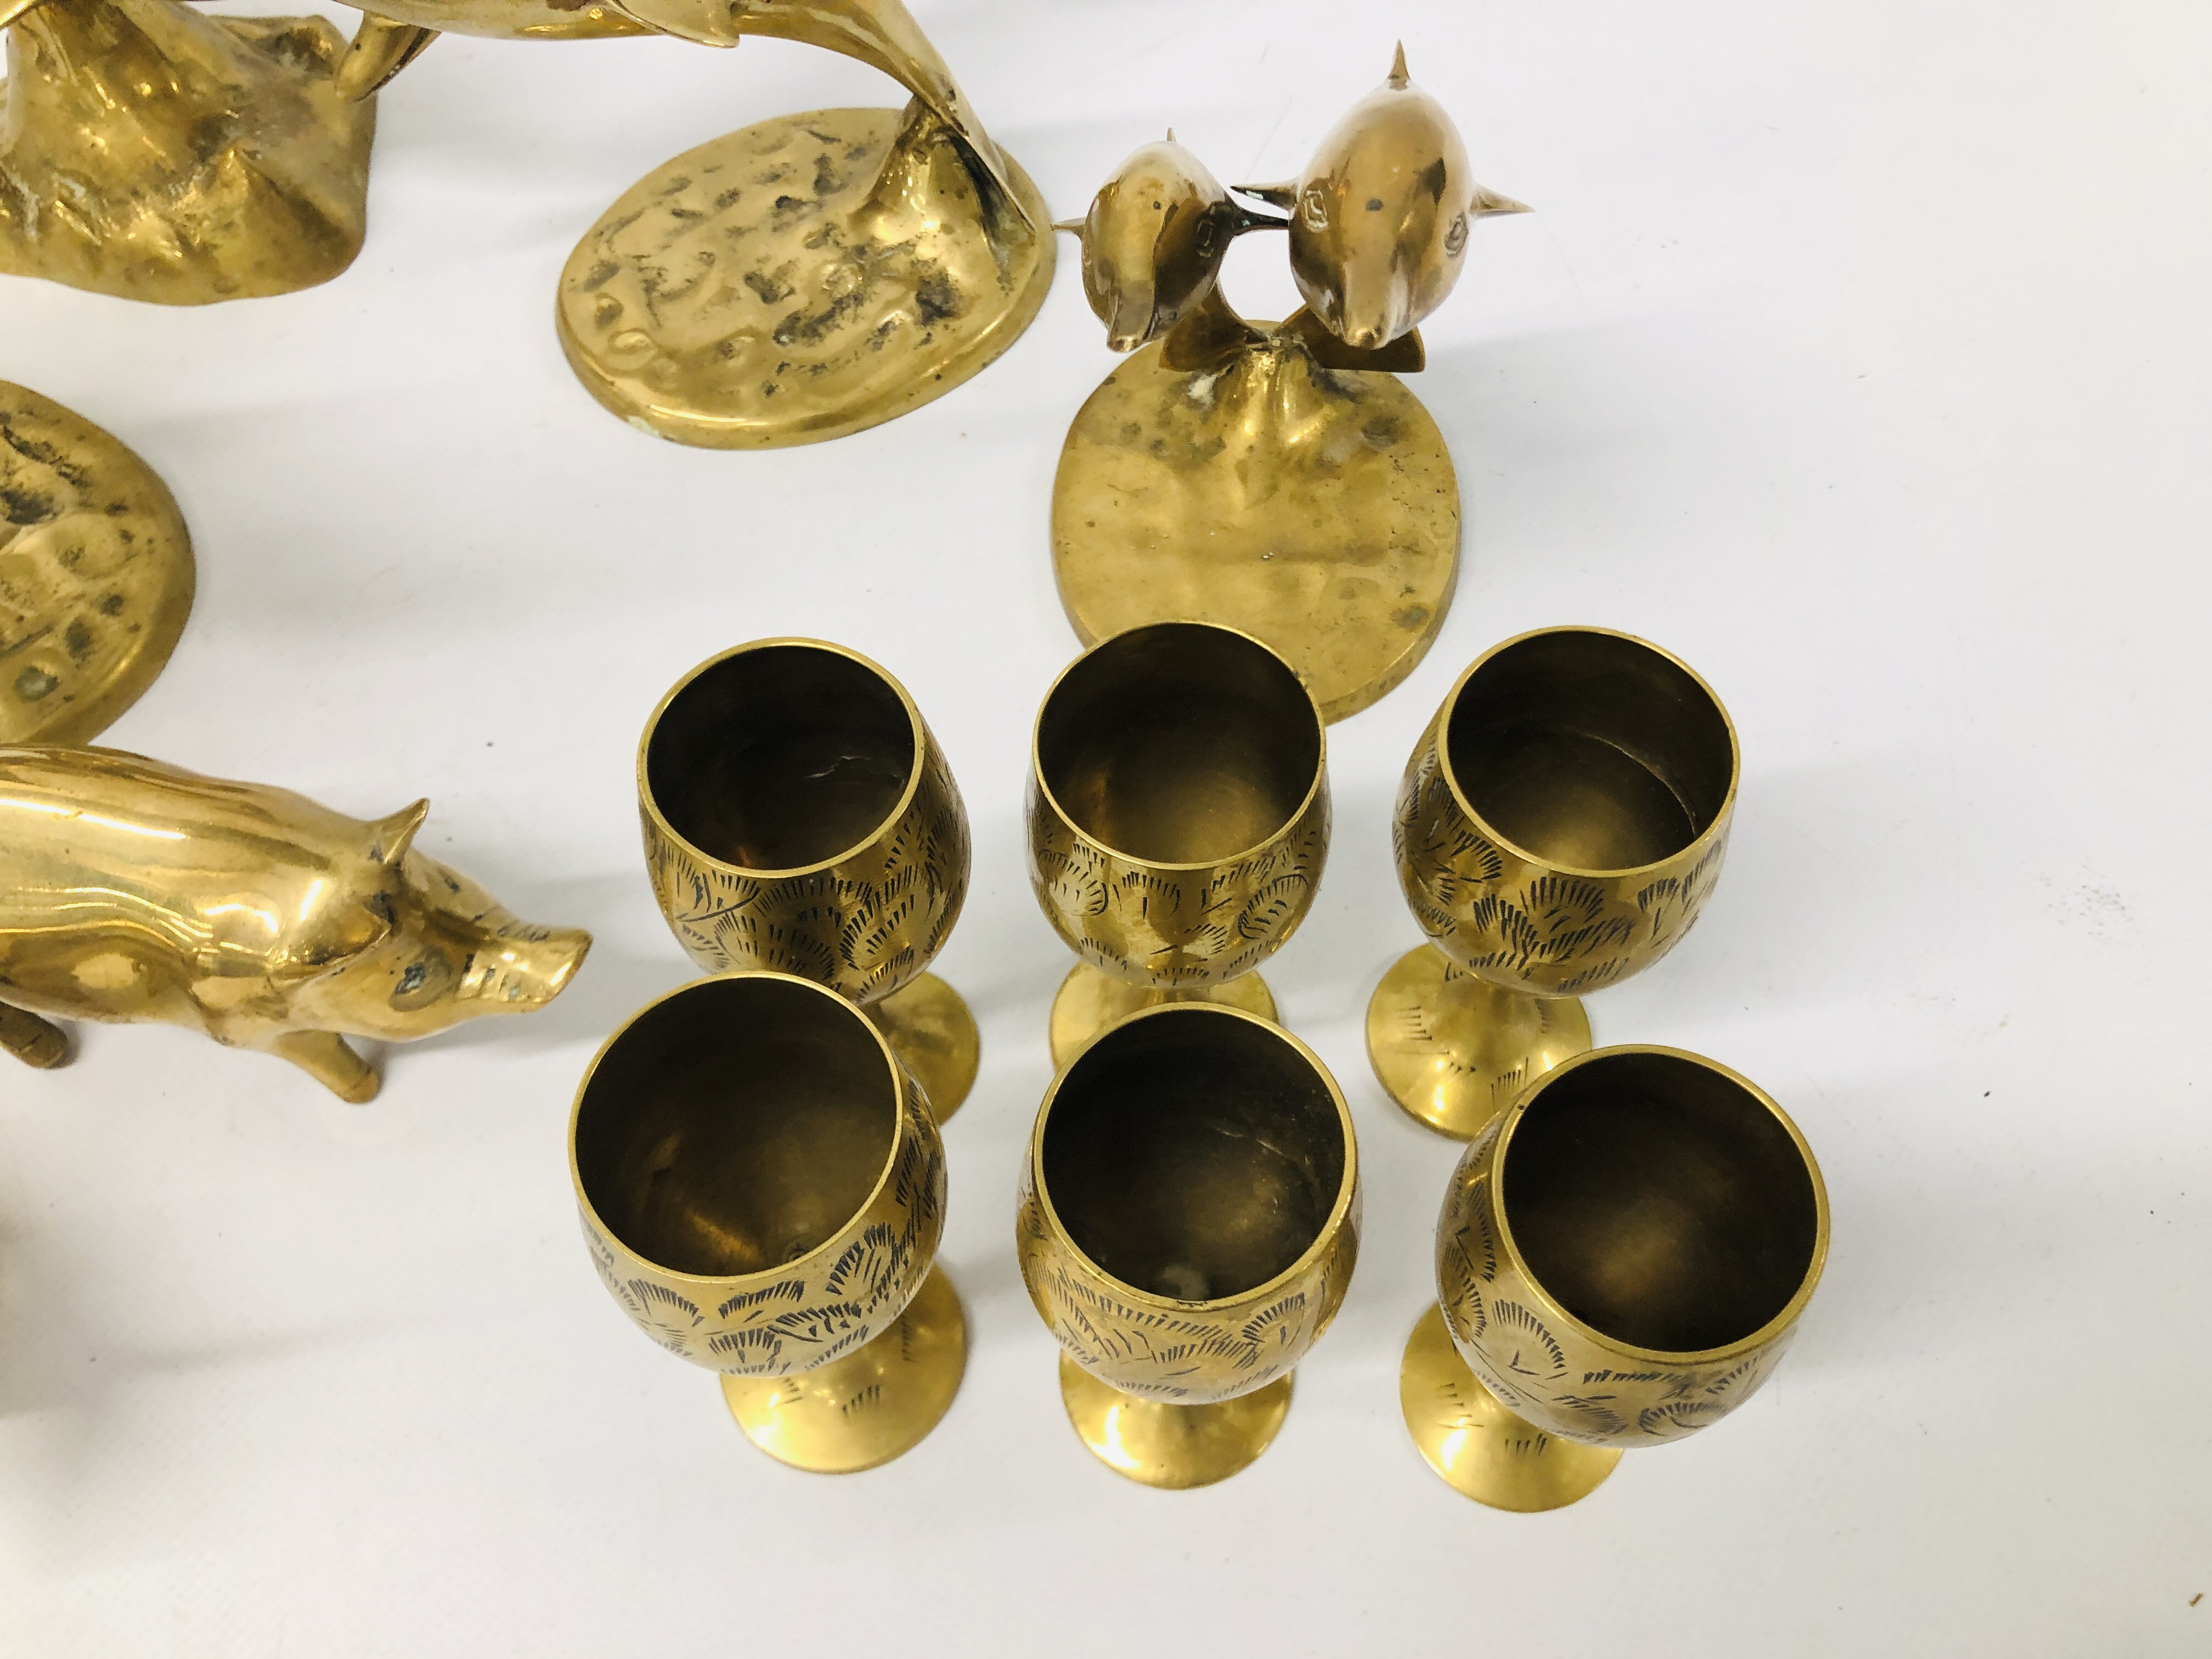 COLLECTION OF BRASS DOLPHINS, PIGS AND GOBLETS. - Image 3 of 6